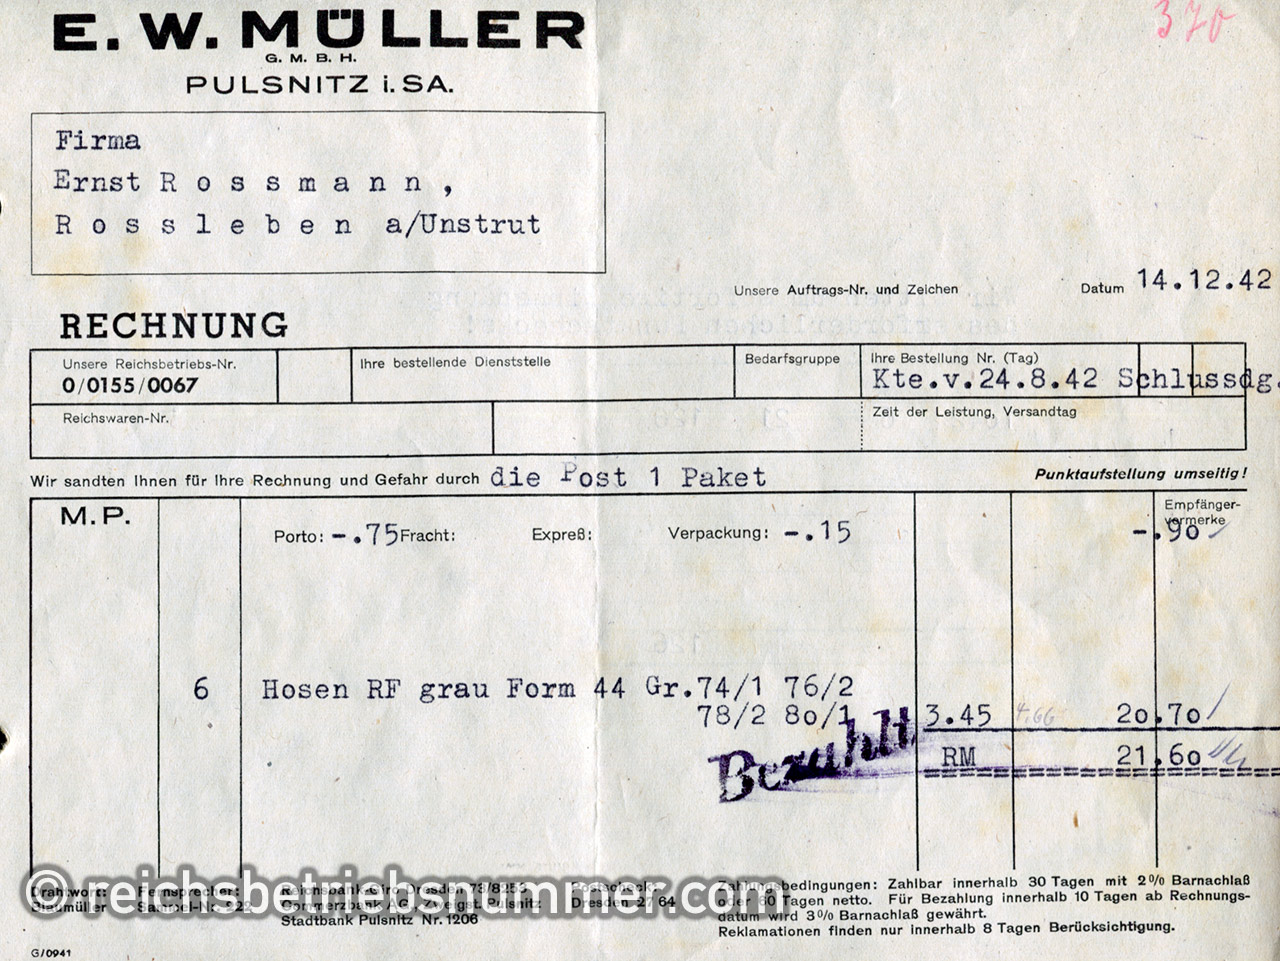 Standard invoice form with predetermined space for the Reichsbetrieb number.